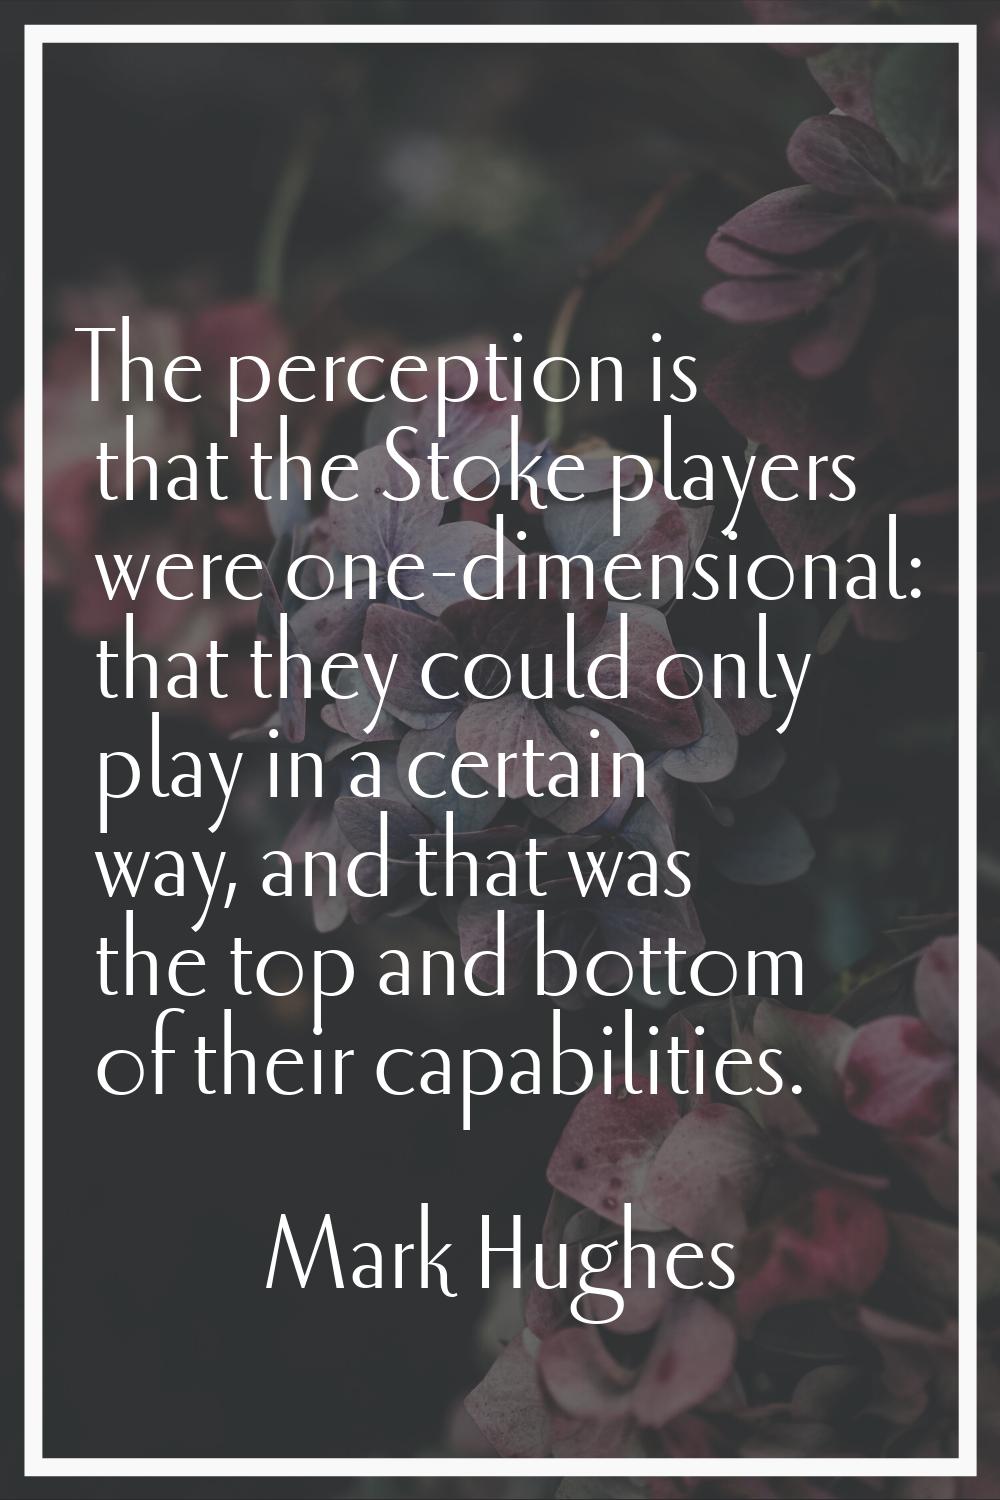 The perception is that the Stoke players were one-dimensional: that they could only play in a certa